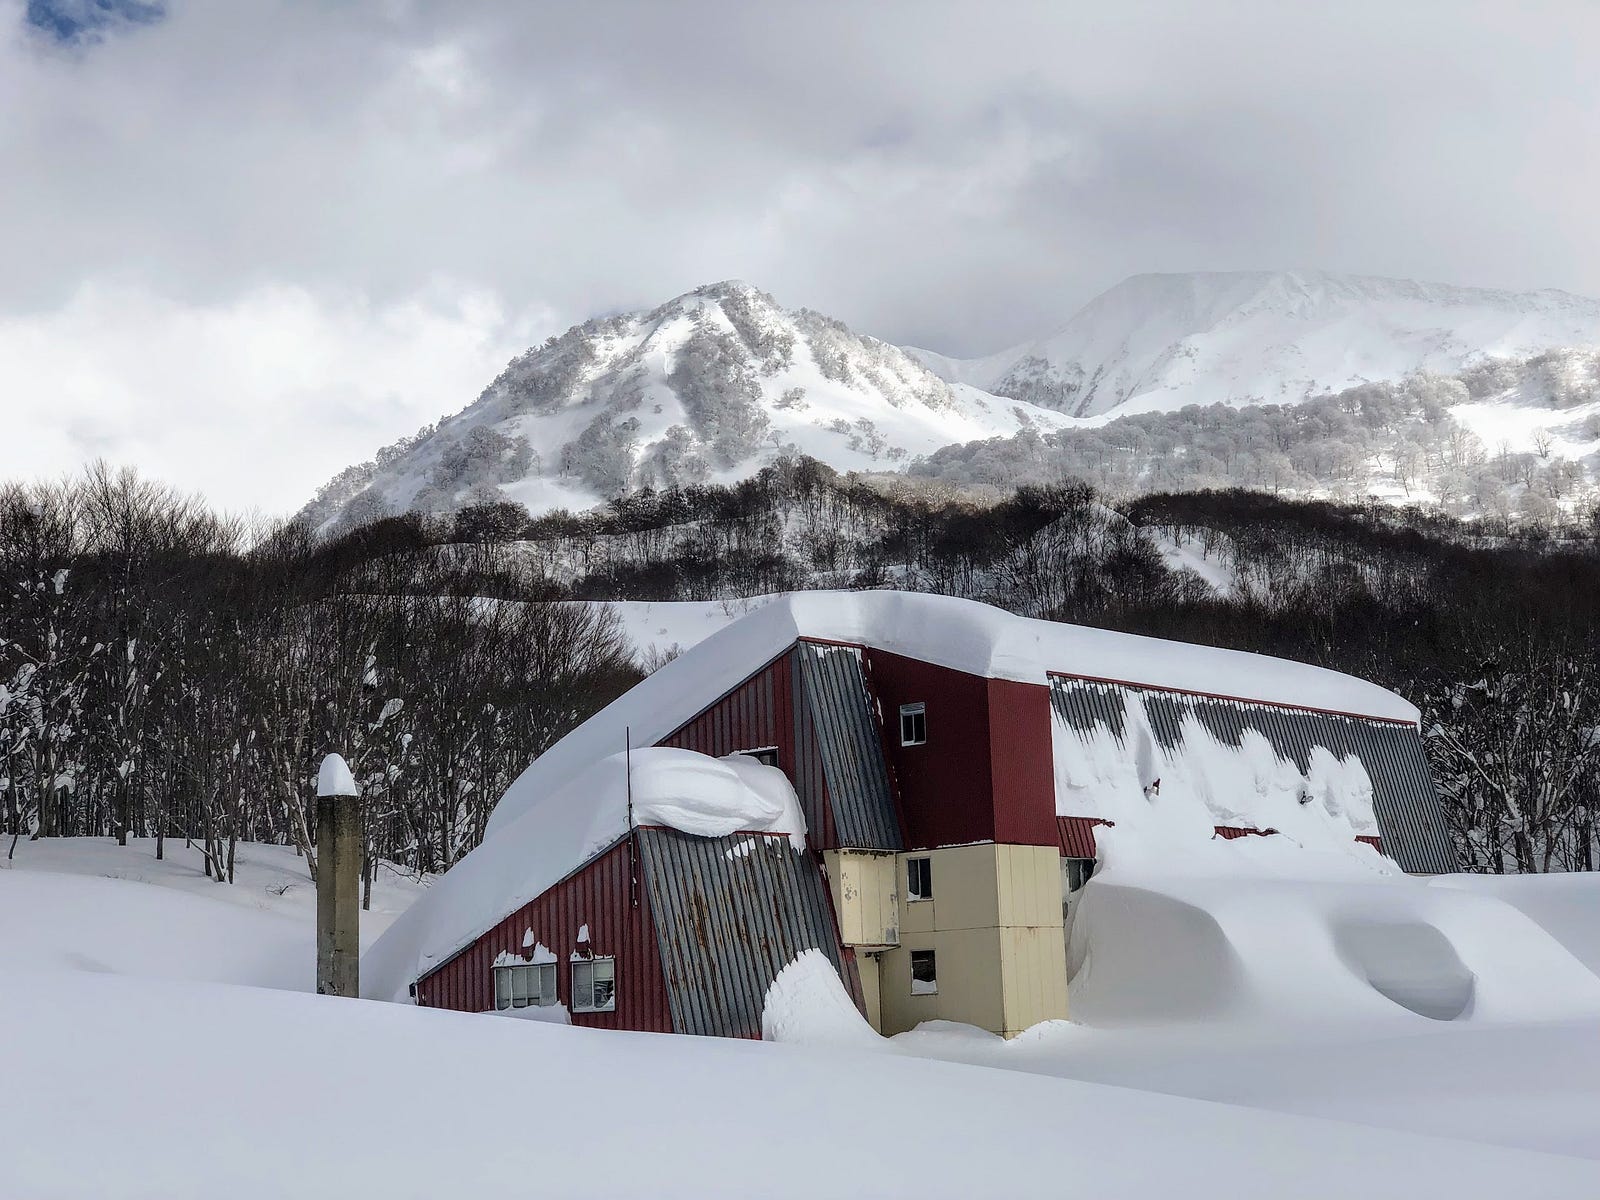 A defunct Ryokan traditional Japanese Inn inundated with snow sits in the foreground of this snowy landscape with the real Mt. Yudono in the background